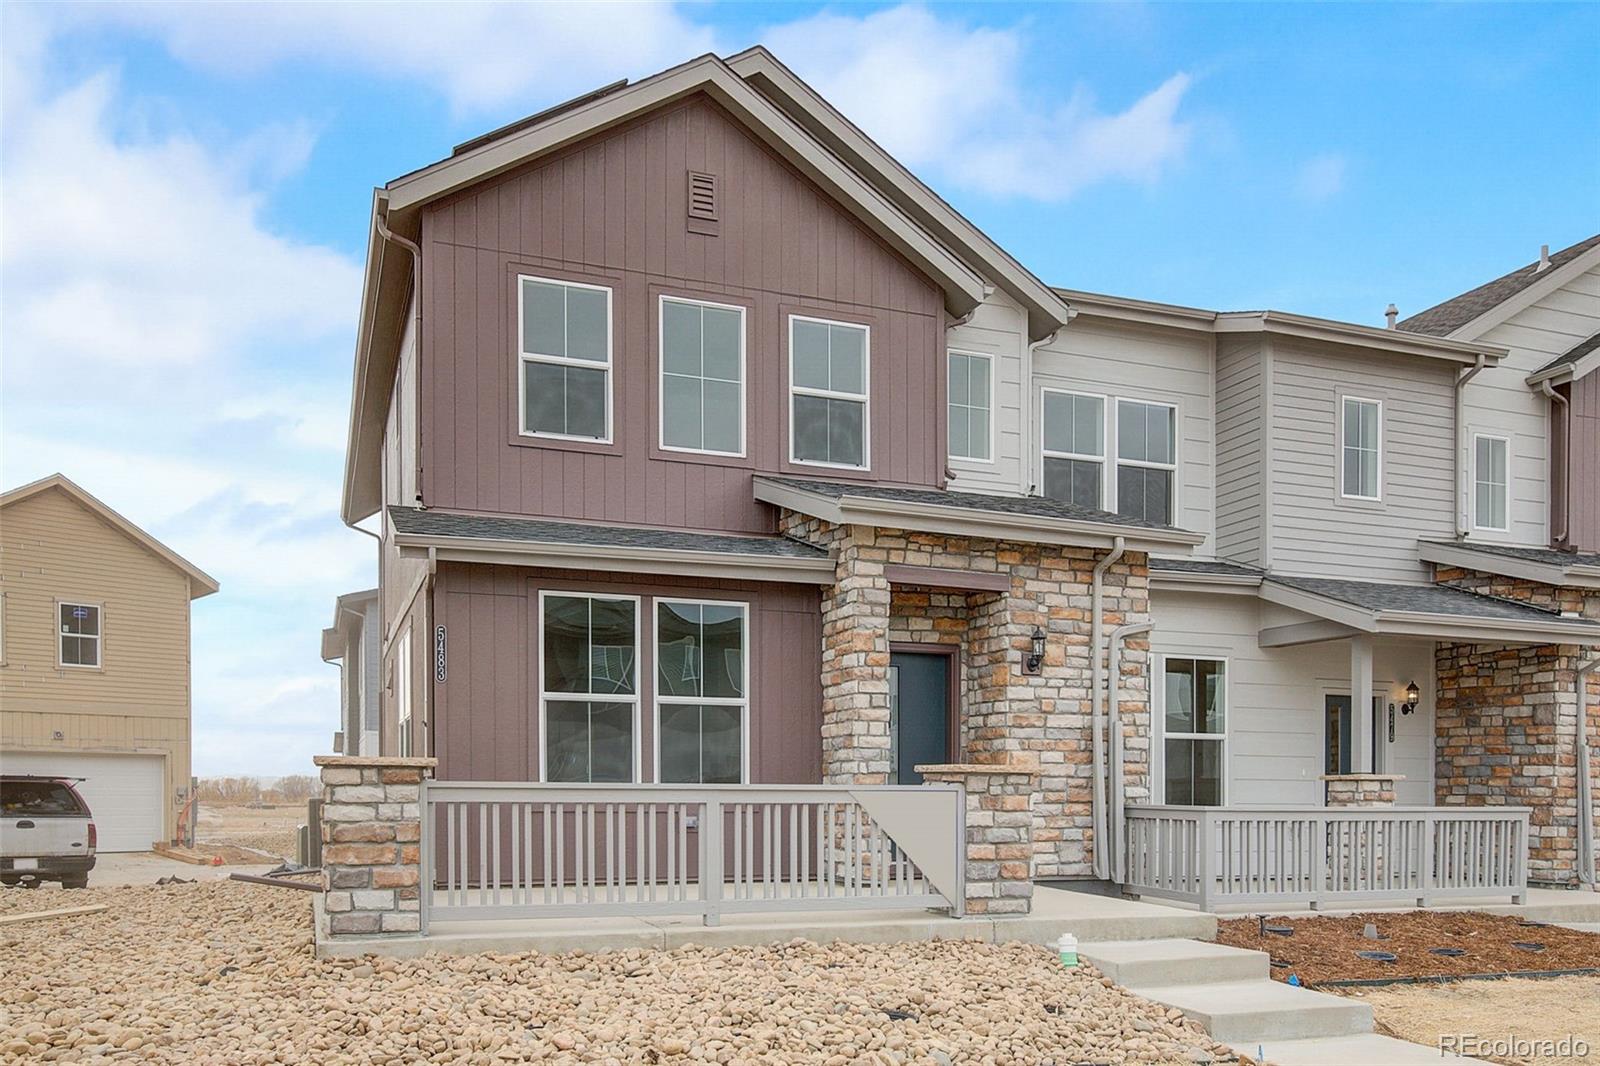 Report Image for 5483  Euclid Court,Timnath, Colorado